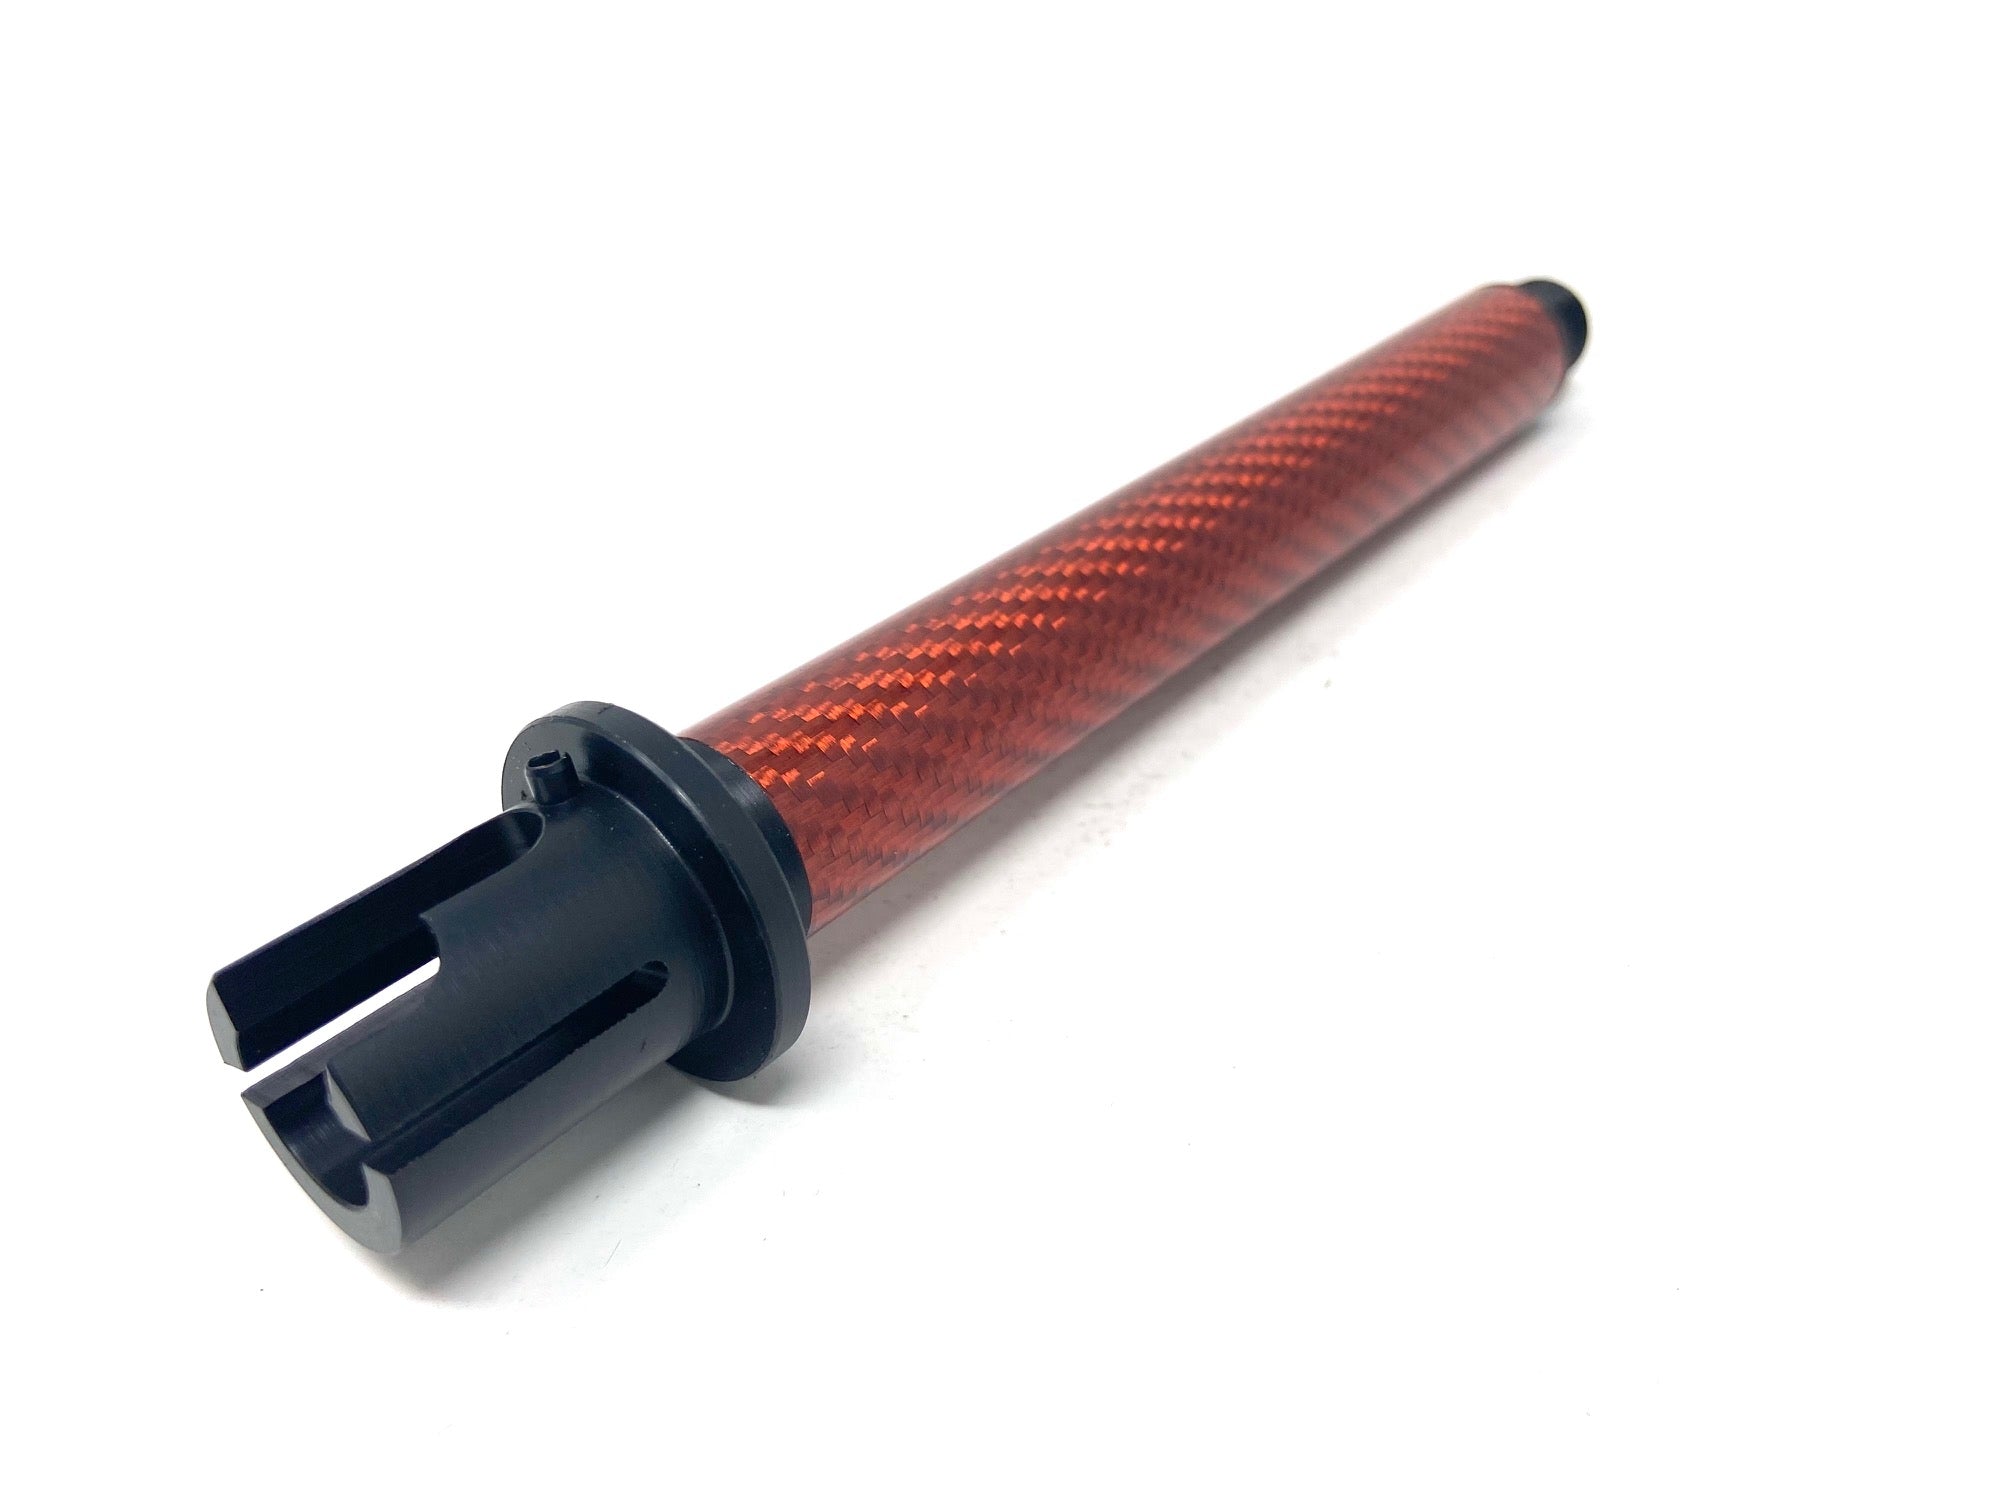 This MAC Custom Airosft XL Pom carbon fiber outer barrel is the perfect, lightweight alternative to standard ste.  Fits most M4 style rifles.  This model is the 7" version.  This replaces your stock outer barrel for easy installation.  Deck out your custom gun today with the newest aftermarket accessories in the game! Let's Get It!